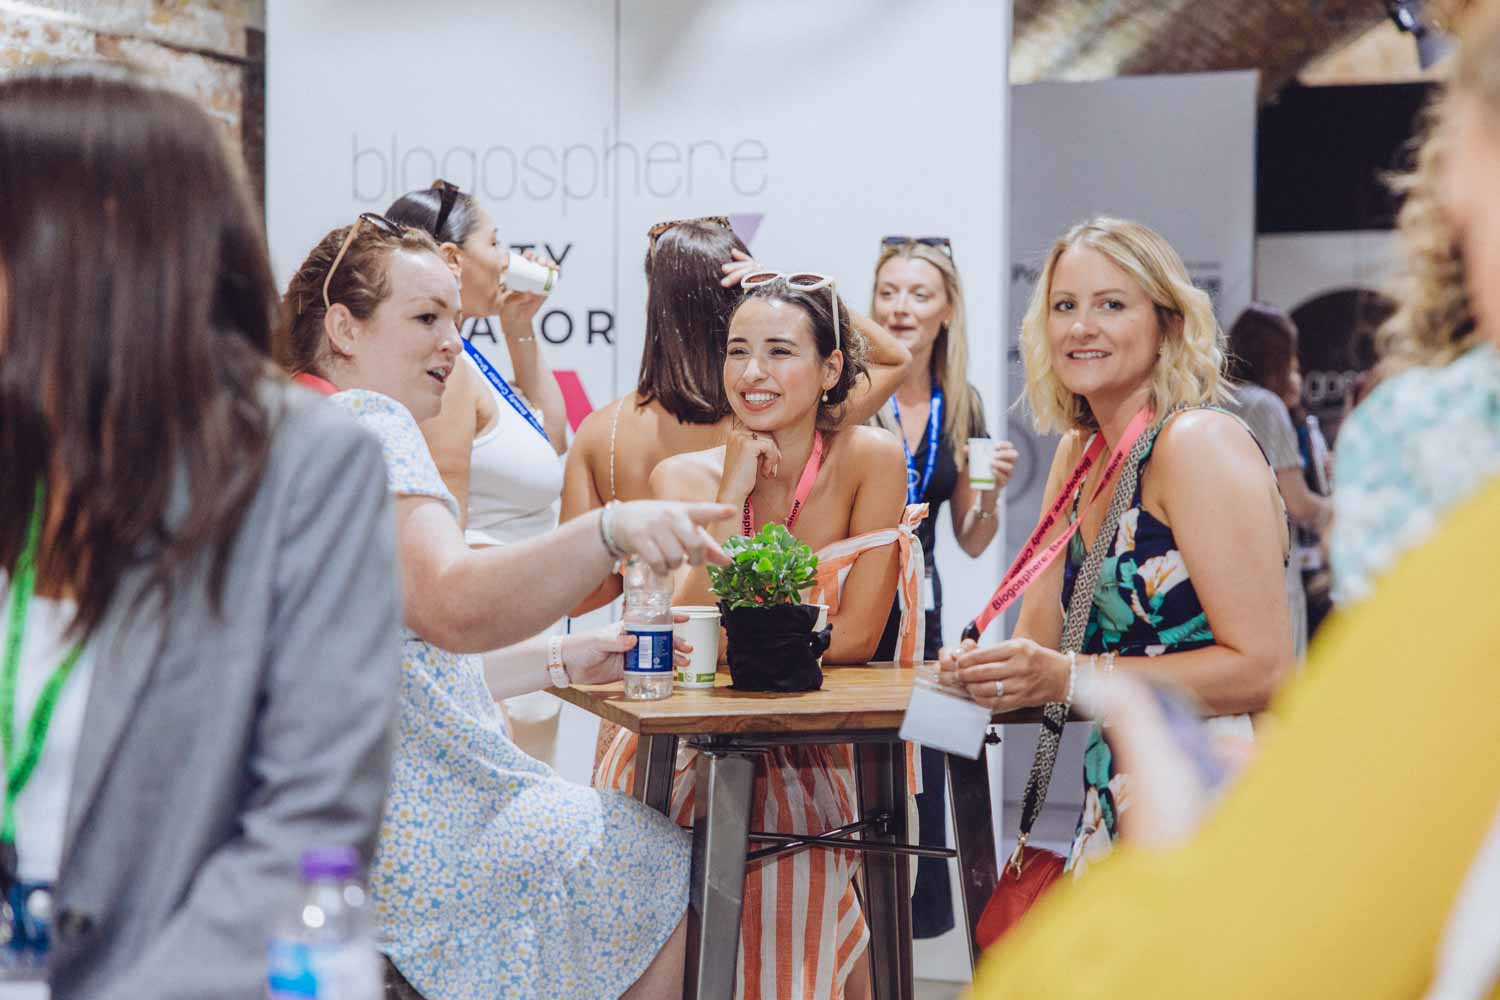 Networking at Blogosphere Beauty Creator Show